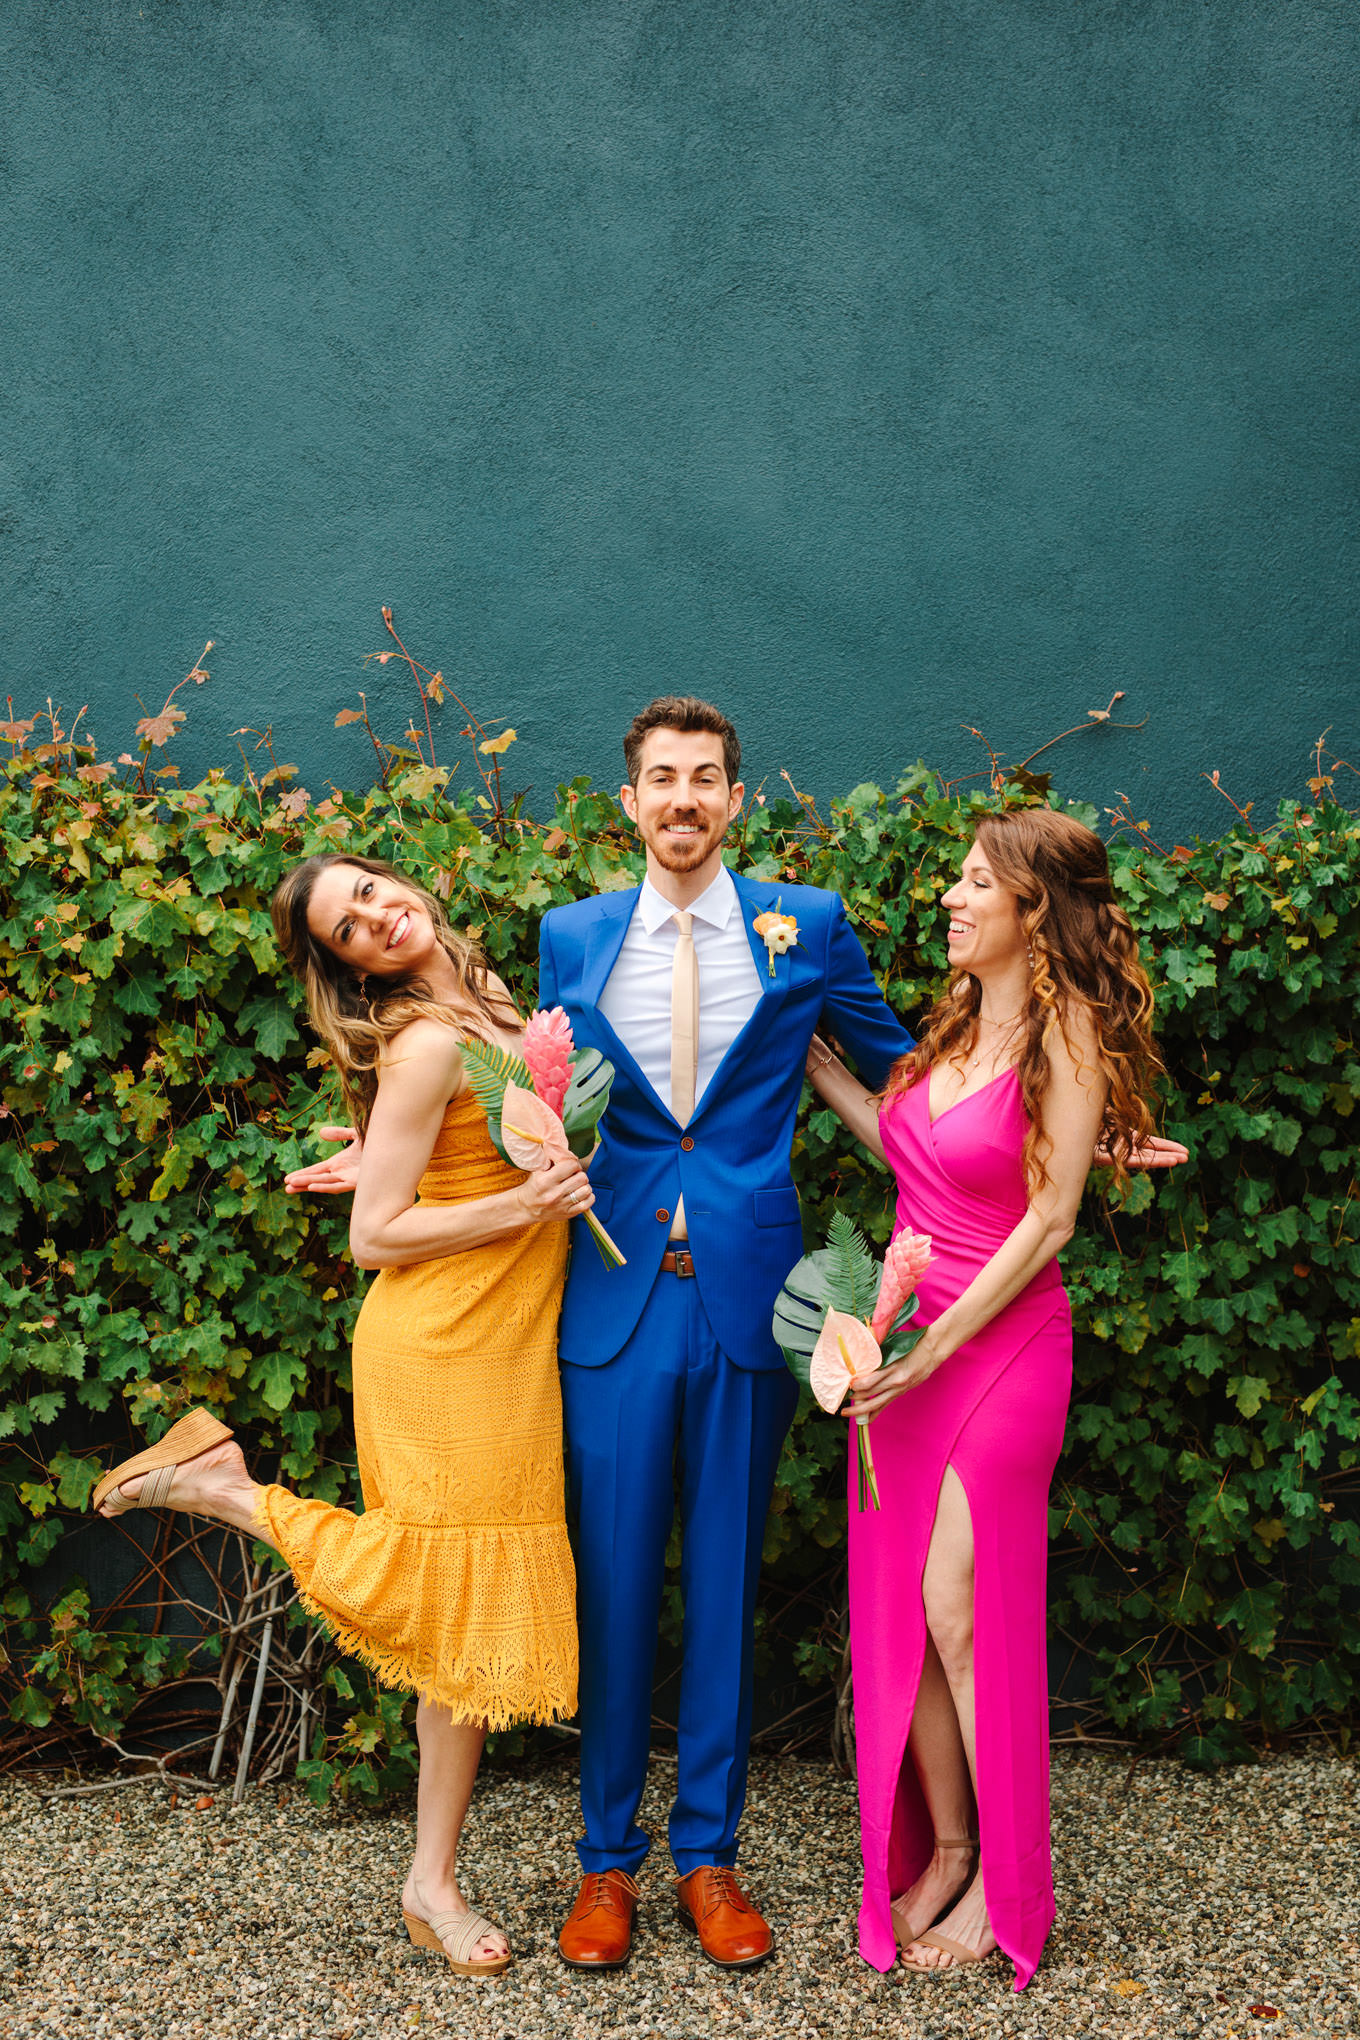 Groom with his sisters | TV inspired wedding at The Fig House Los Angeles | Published on The Knot | Fresh and colorful photography for fun-loving couples in Southern California | #losangeleswedding #TVwedding #colorfulwedding #theknot   Source: Mary Costa Photography | Los Angeles wedding photographer